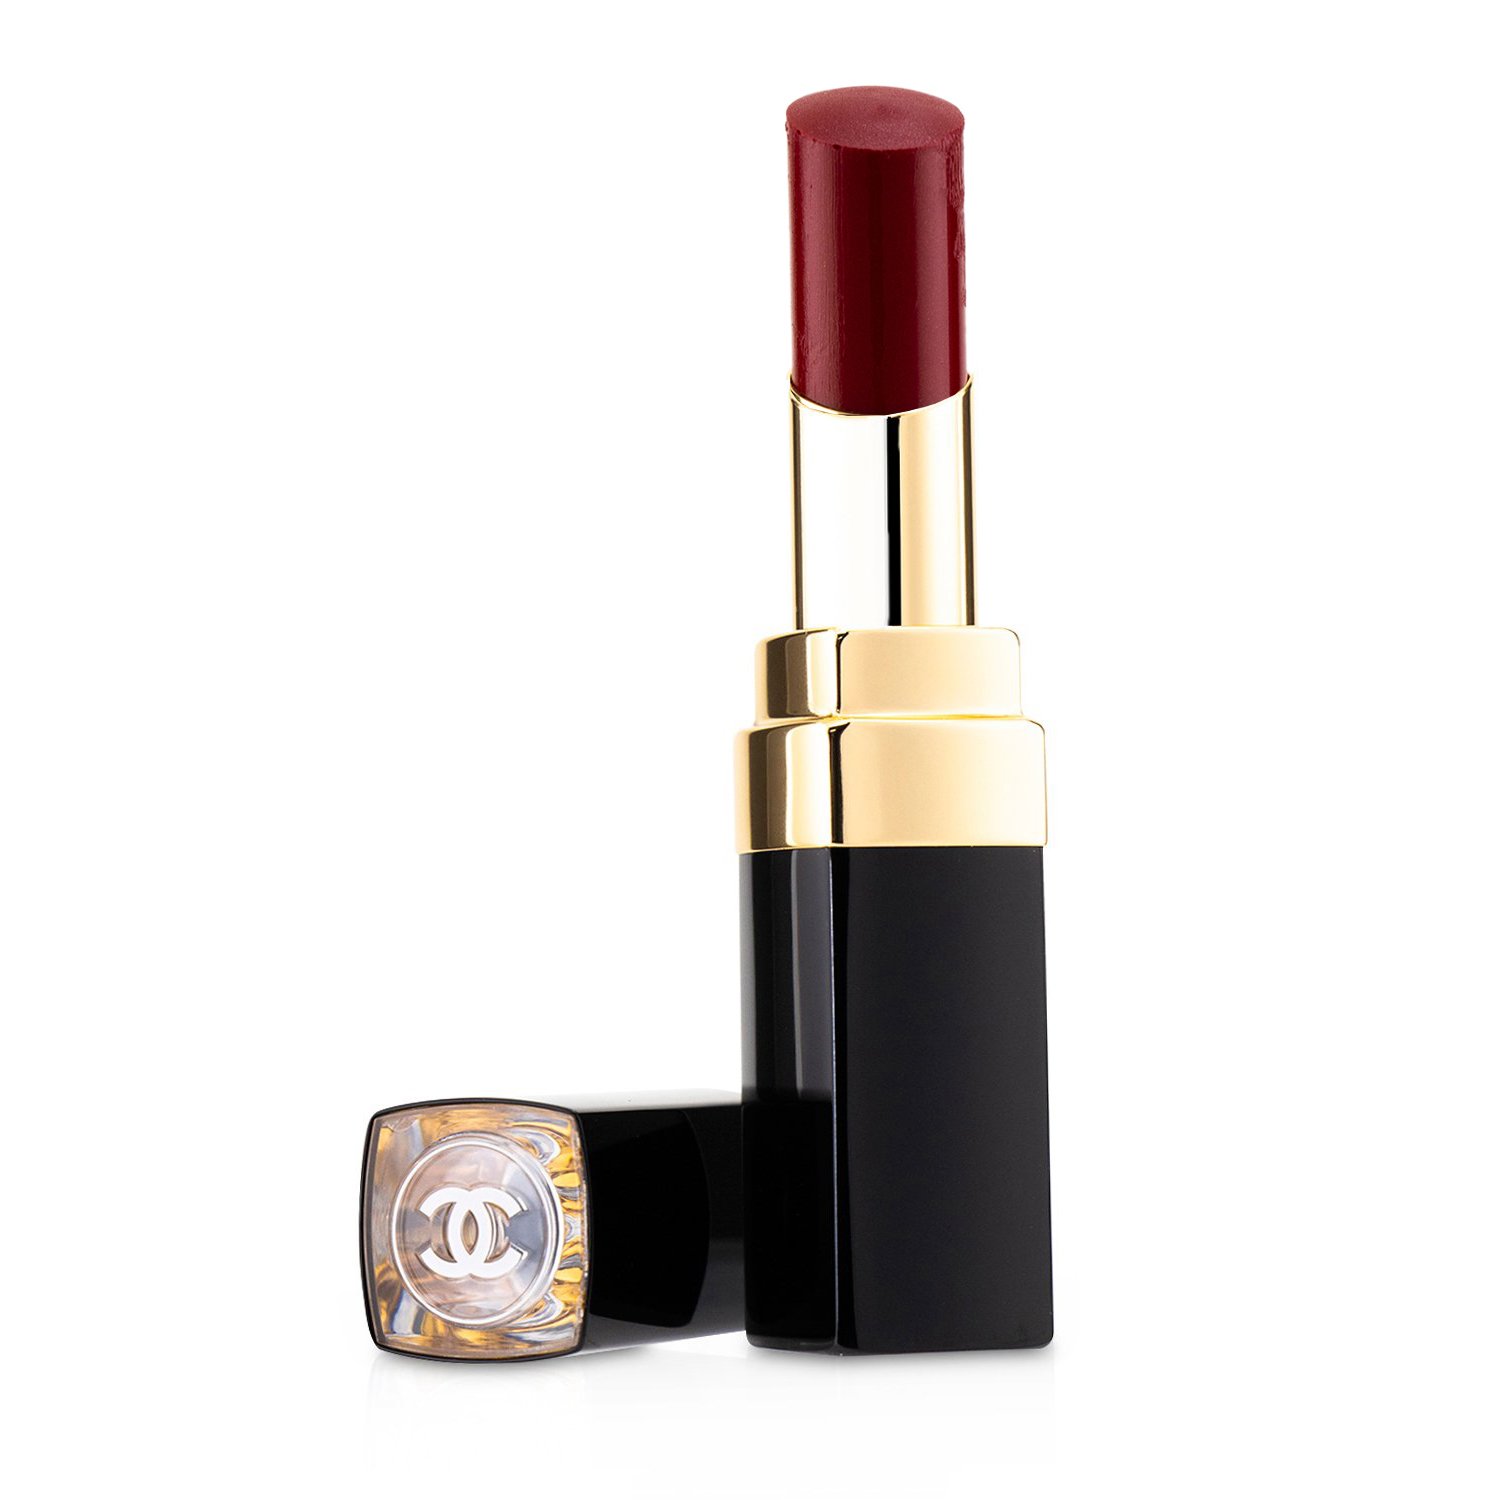 Chanel Rouge Coco Flash Hydrating Vibrant Shine Lip Colour 3g/0.1oz - Lip  Color, Free Worldwide Shipping